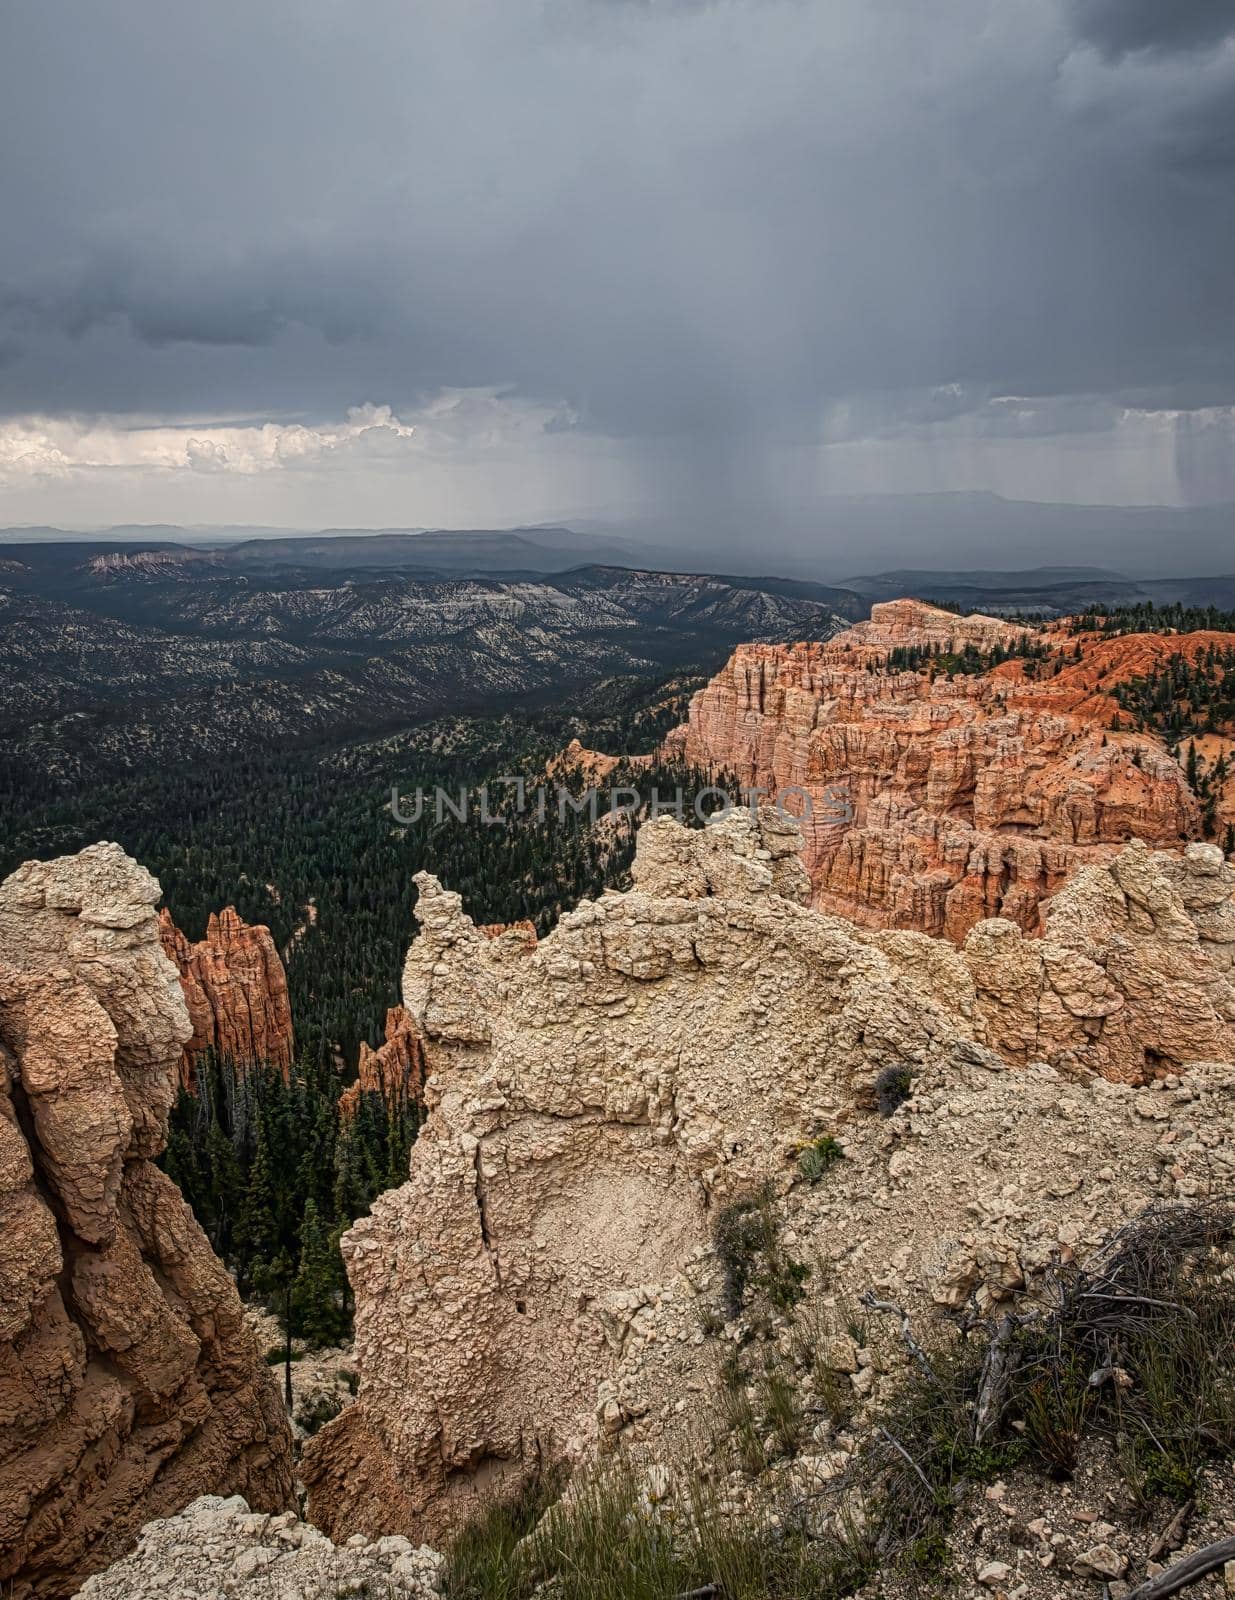 Storms over Bryce Canyon by lisaldw